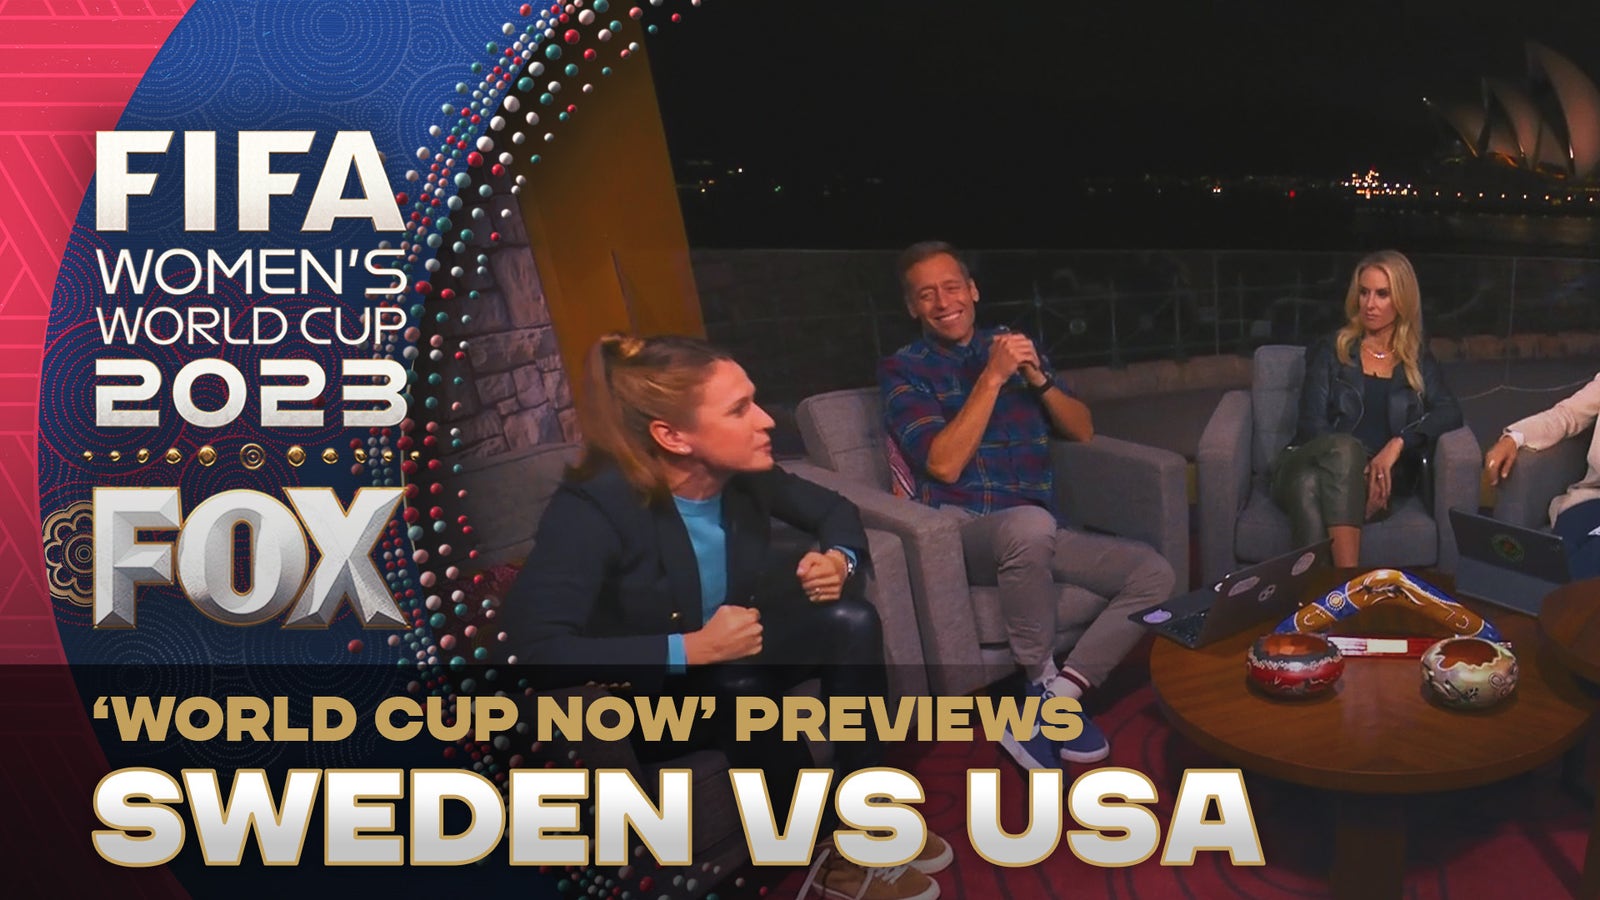 World Cup NOW team previews USA-Sweden